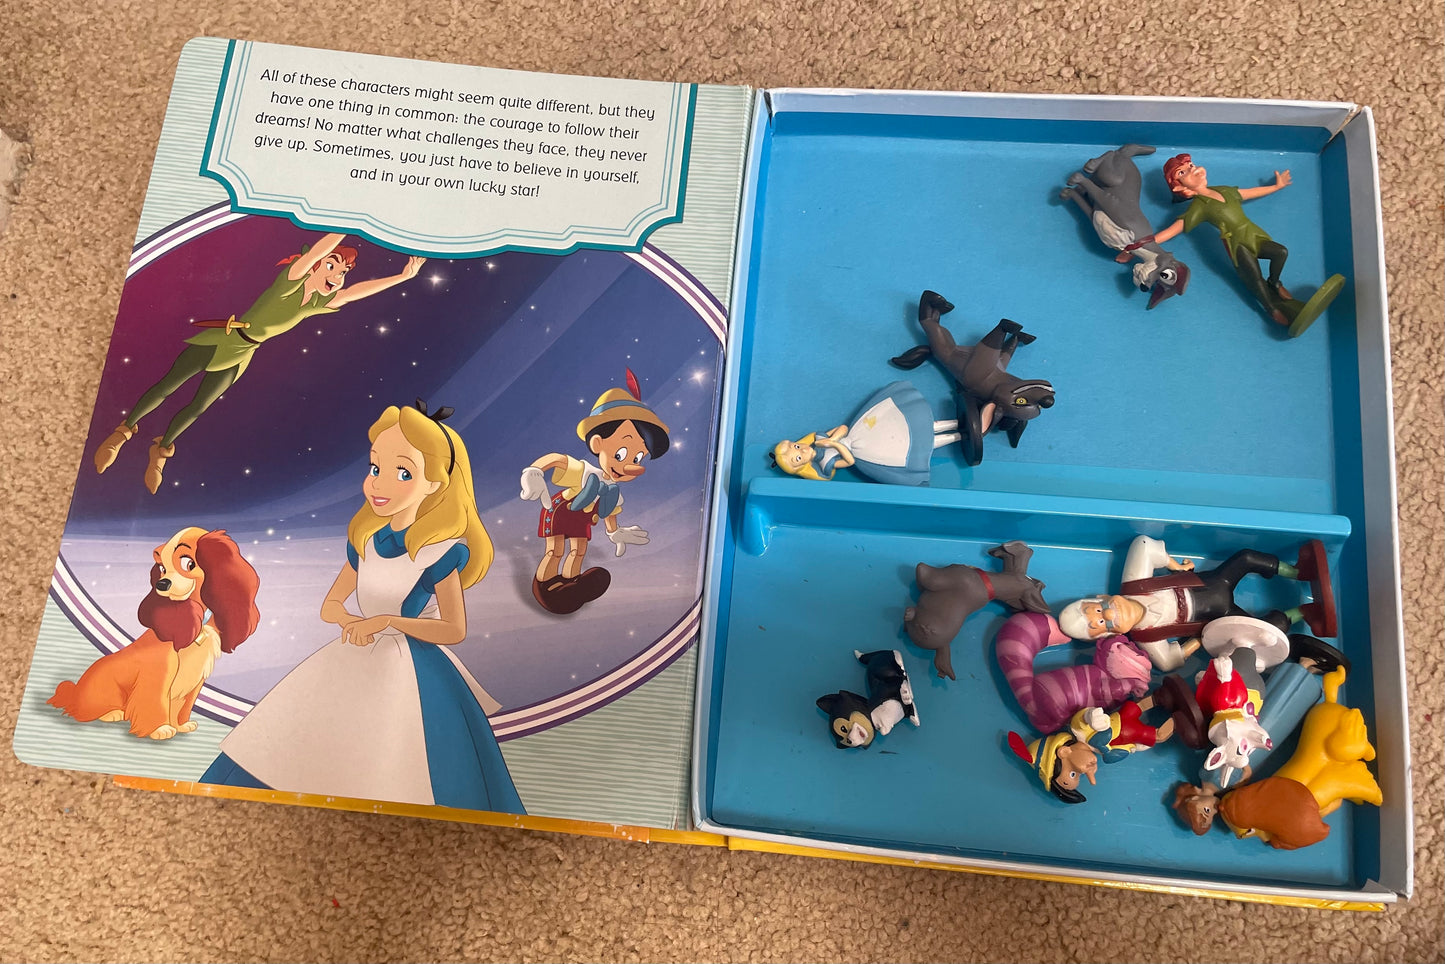 Disney busy book with characters